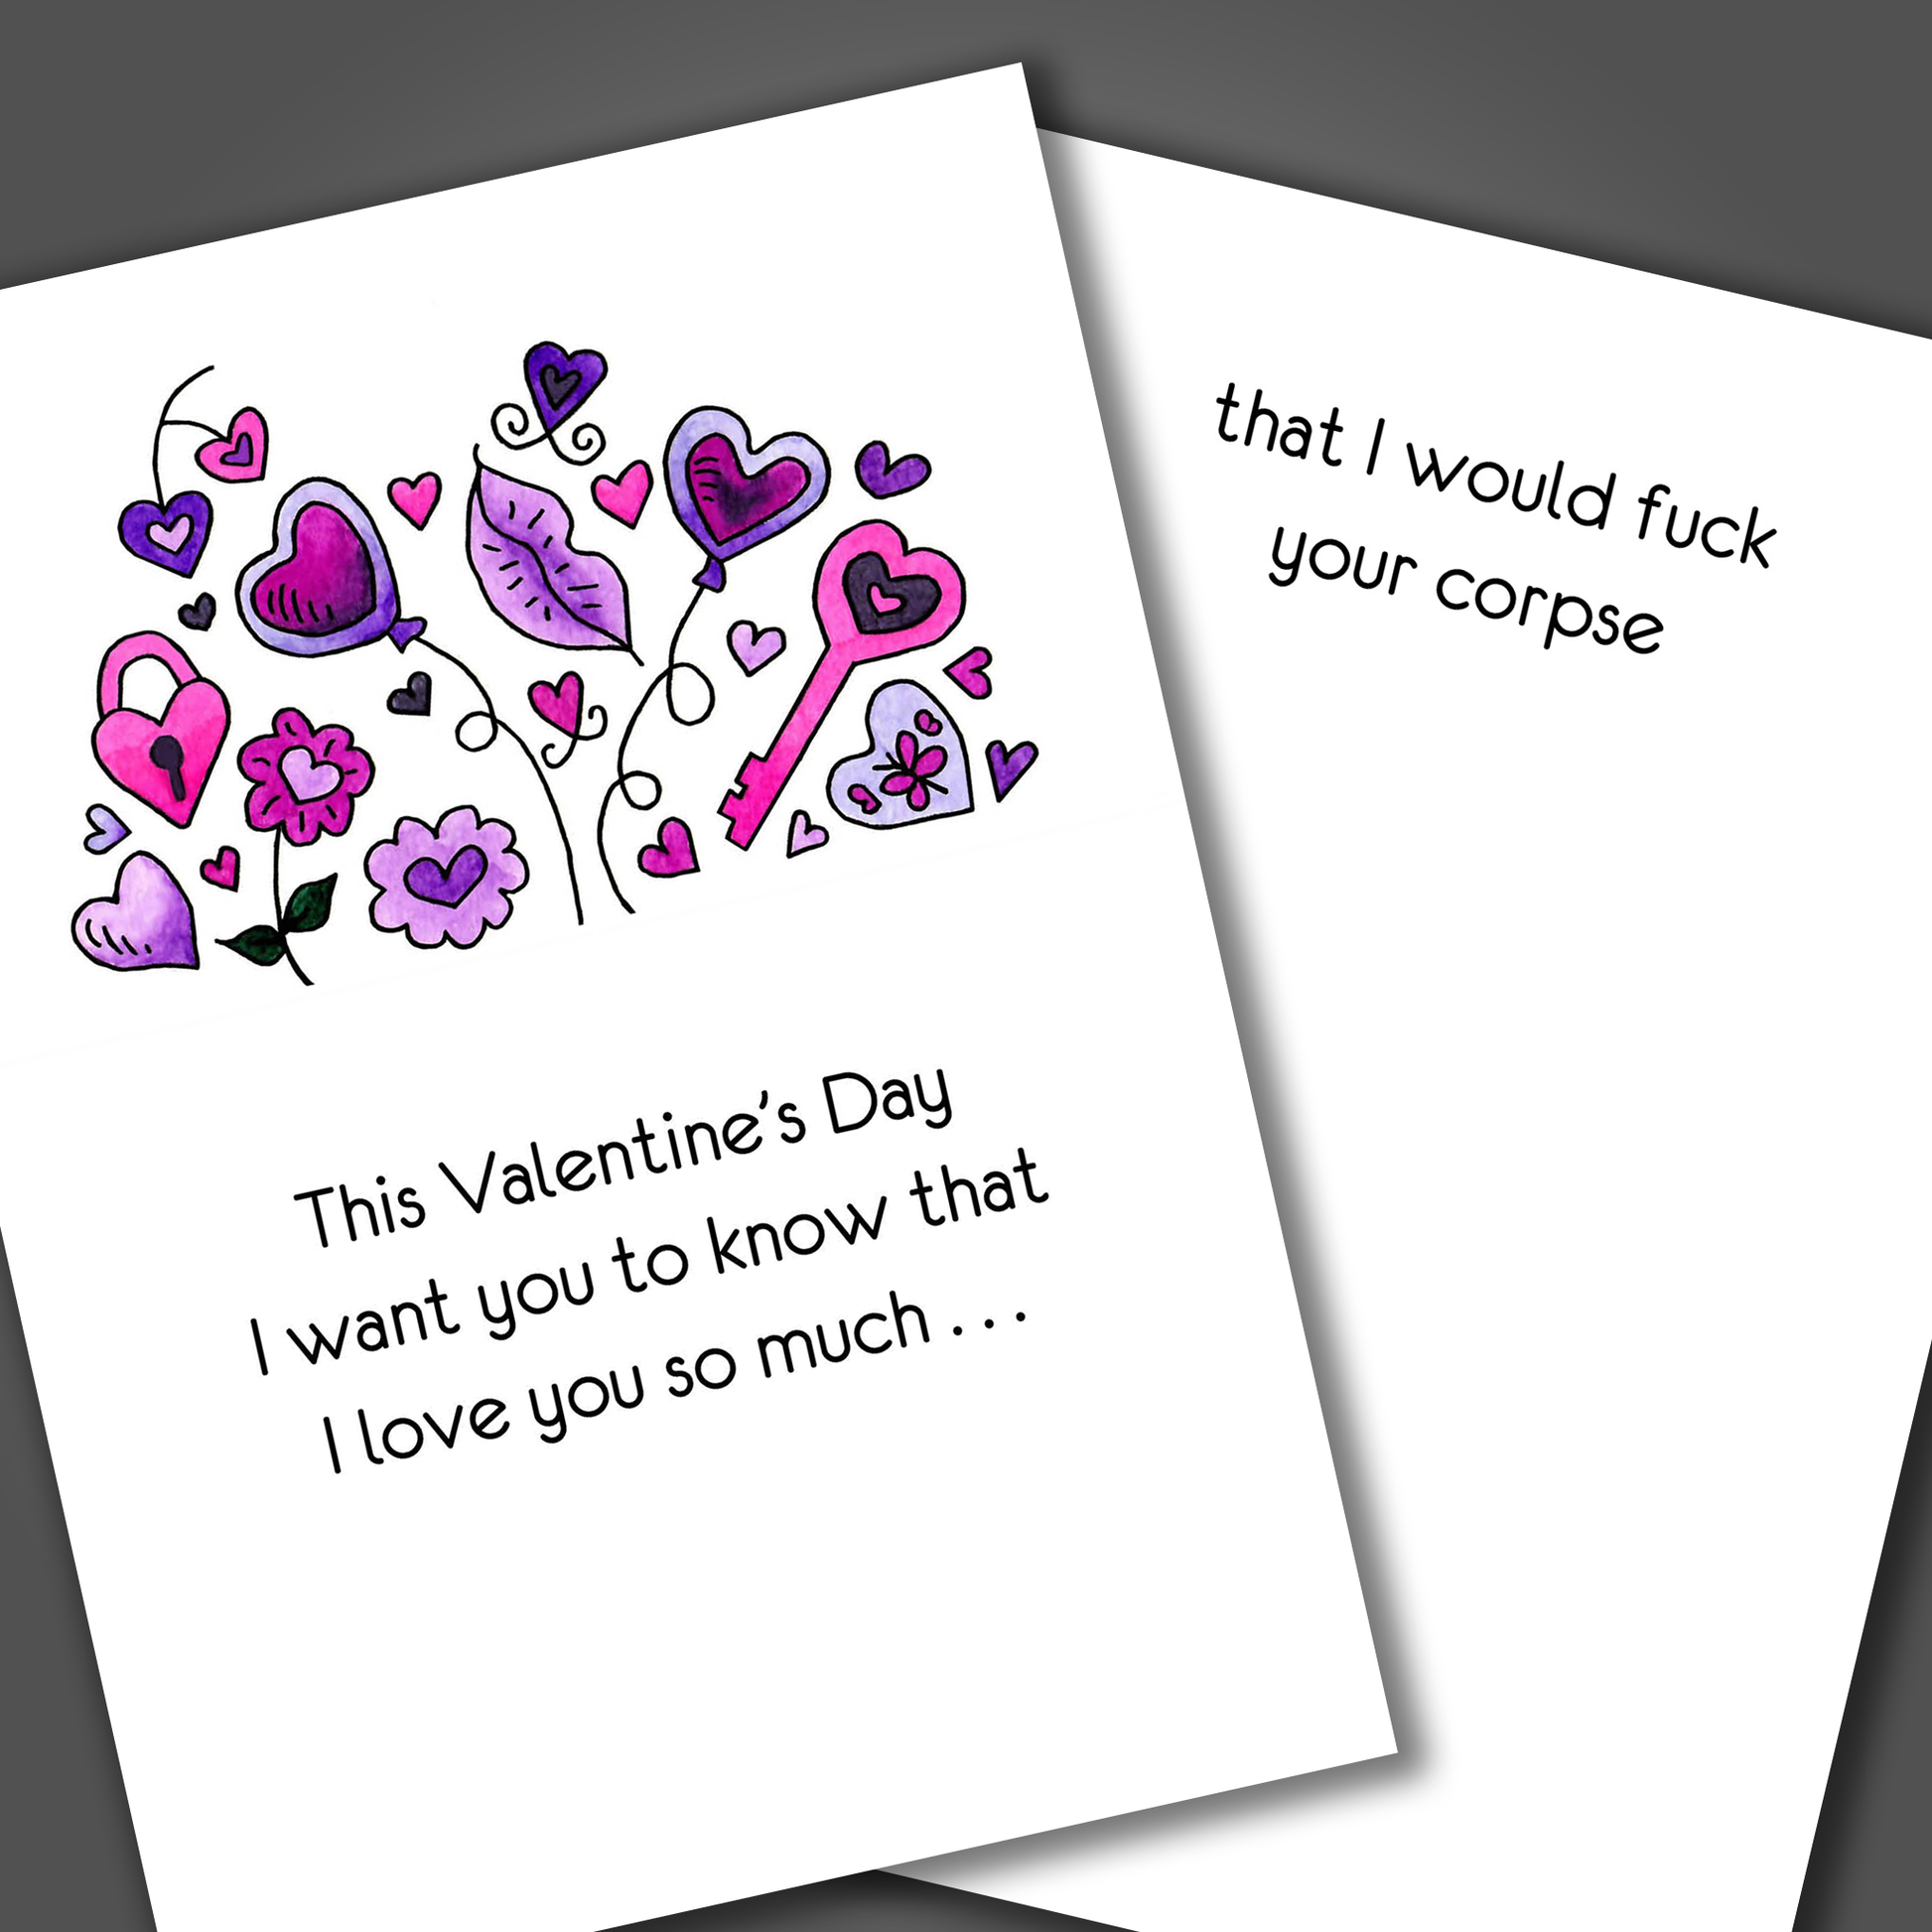 Funny Valentine's day card with pink and purple hearts drawn on the front of the card. Inside is a funny joke that says I would fuck your corpse.